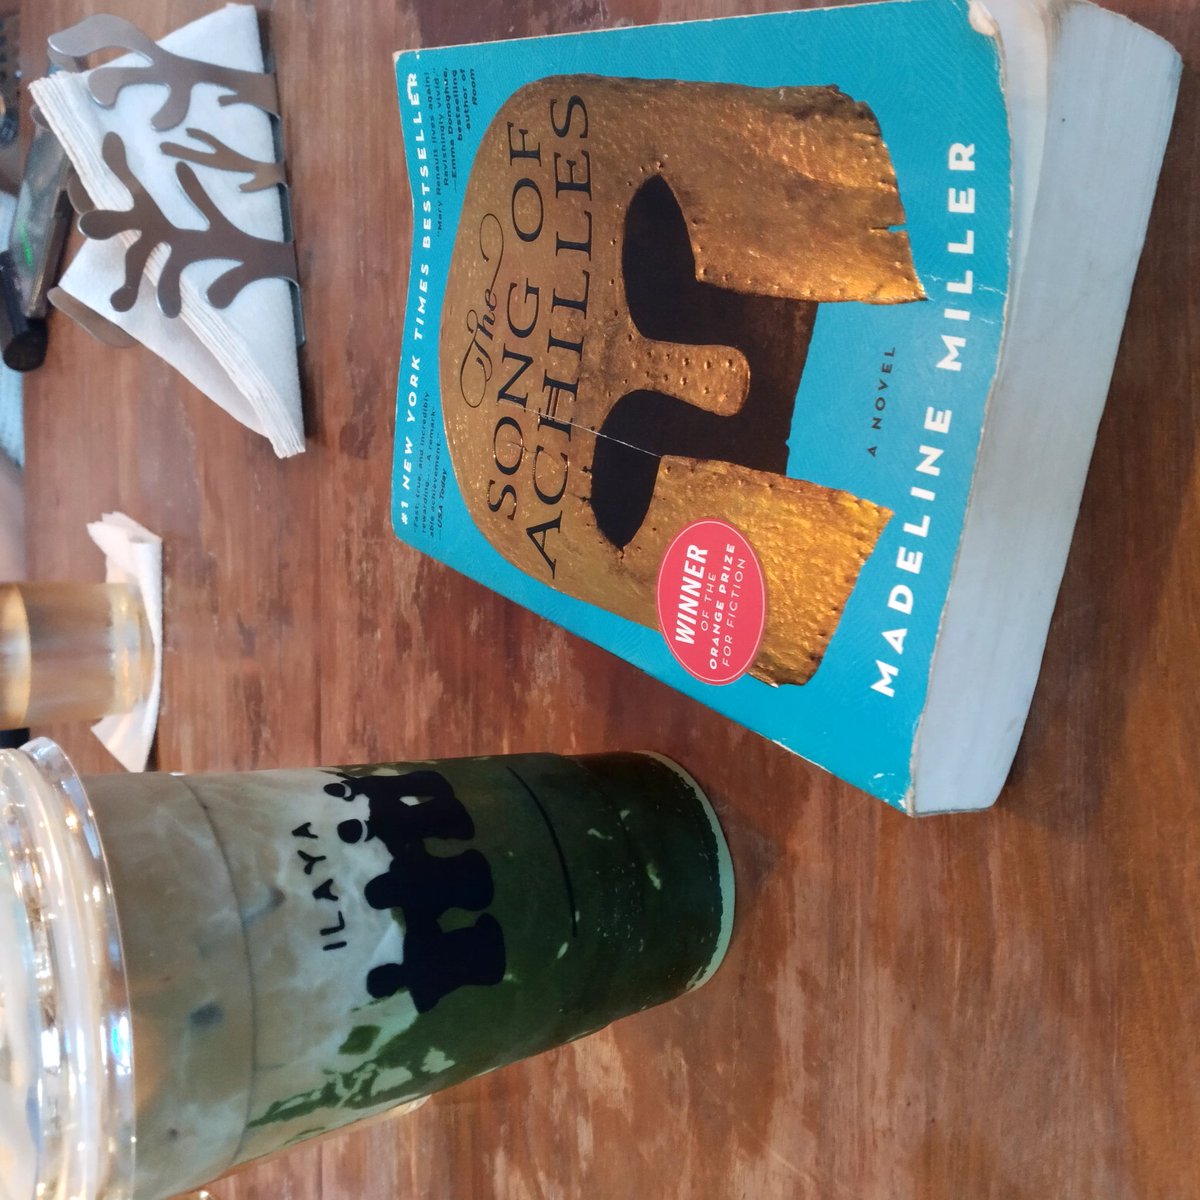 A nice iced matcha latte and one of my favourite books in the world what a way to start my Monday #madelinemiller #songofachilles